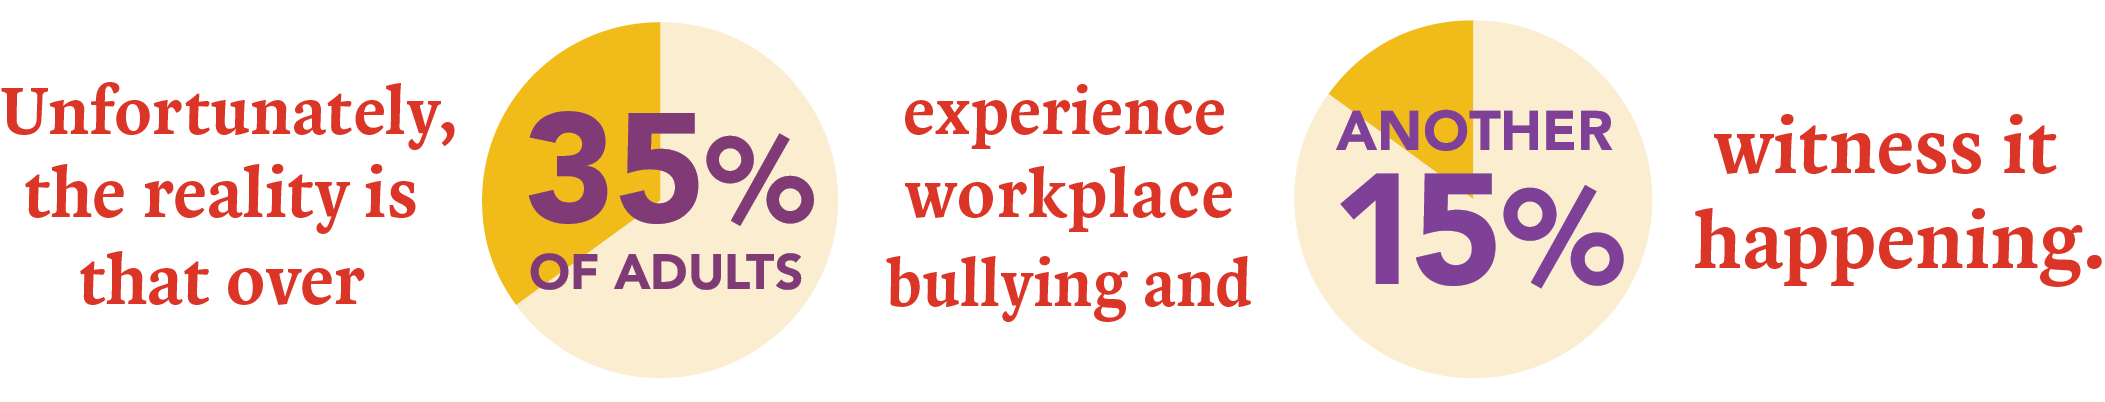 Unfortunately, the reality is that over 35 percent of adults experience workplace bullying and another 15 percent witness it happening.